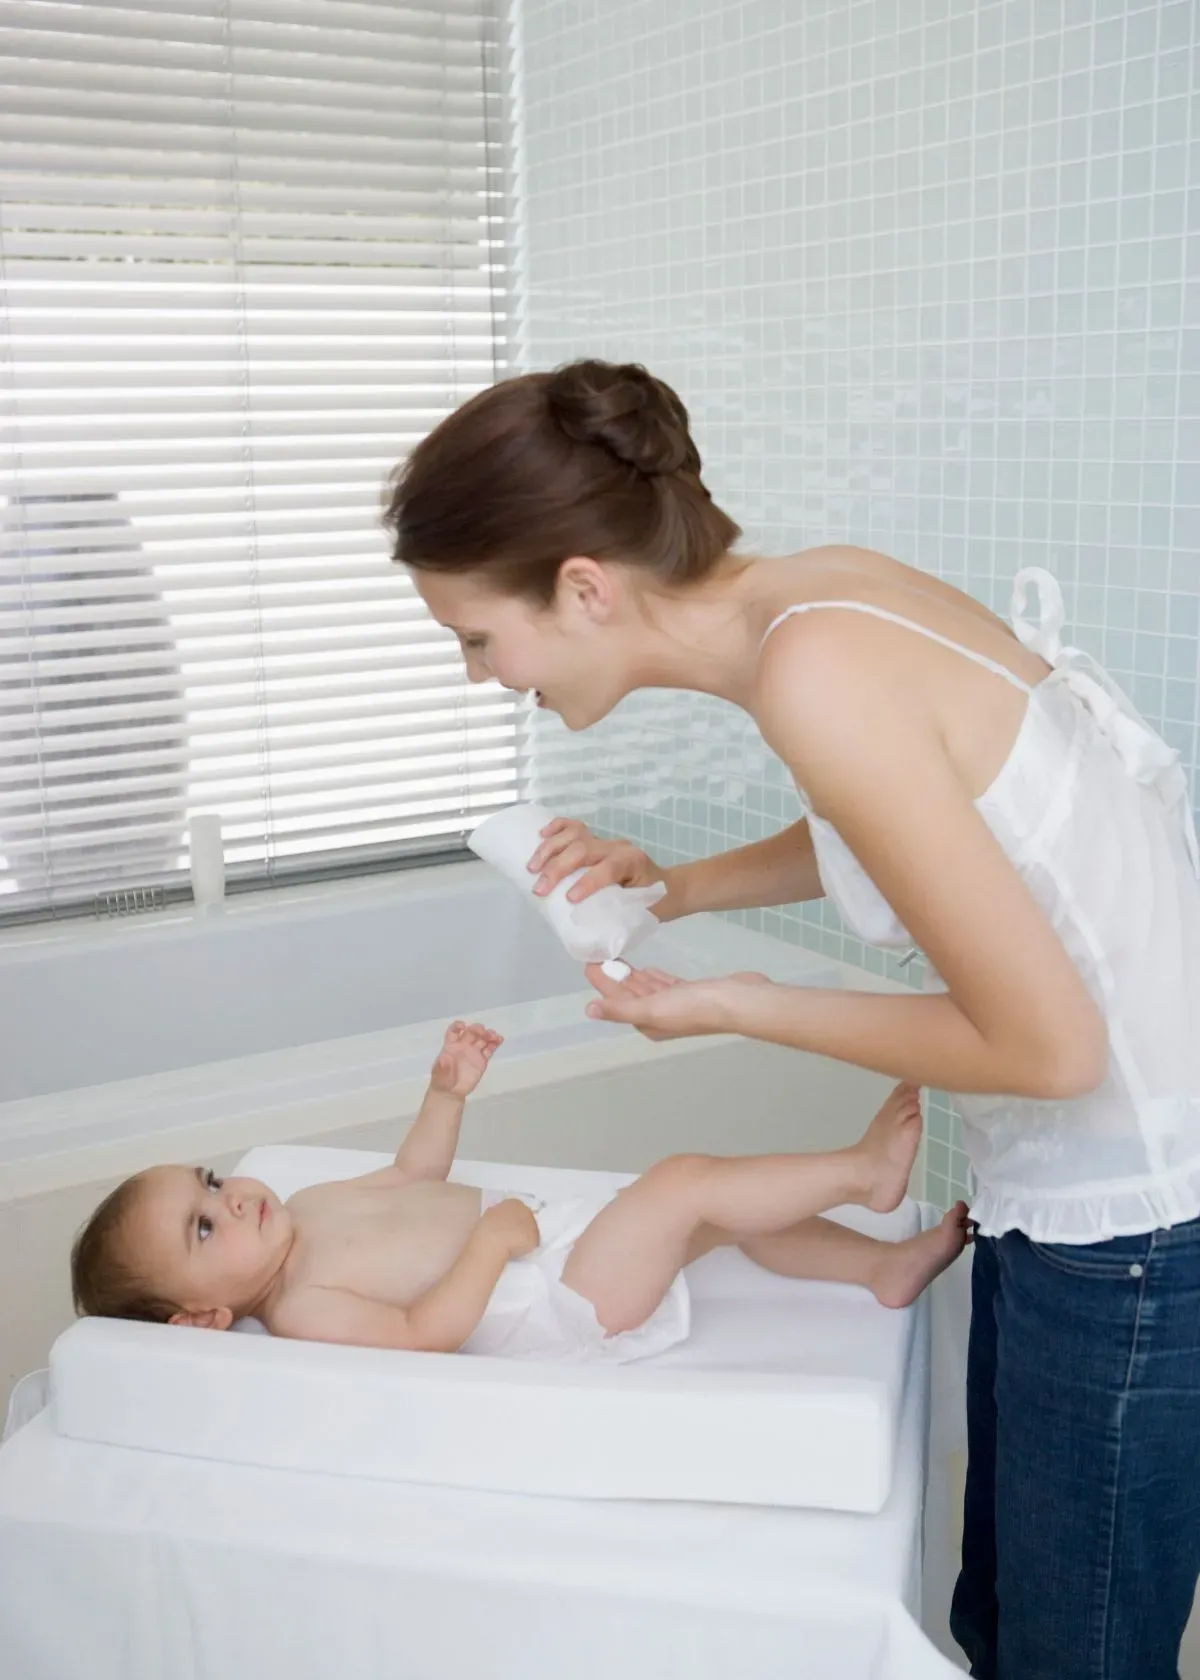 How to Warm Lotion For Baby?